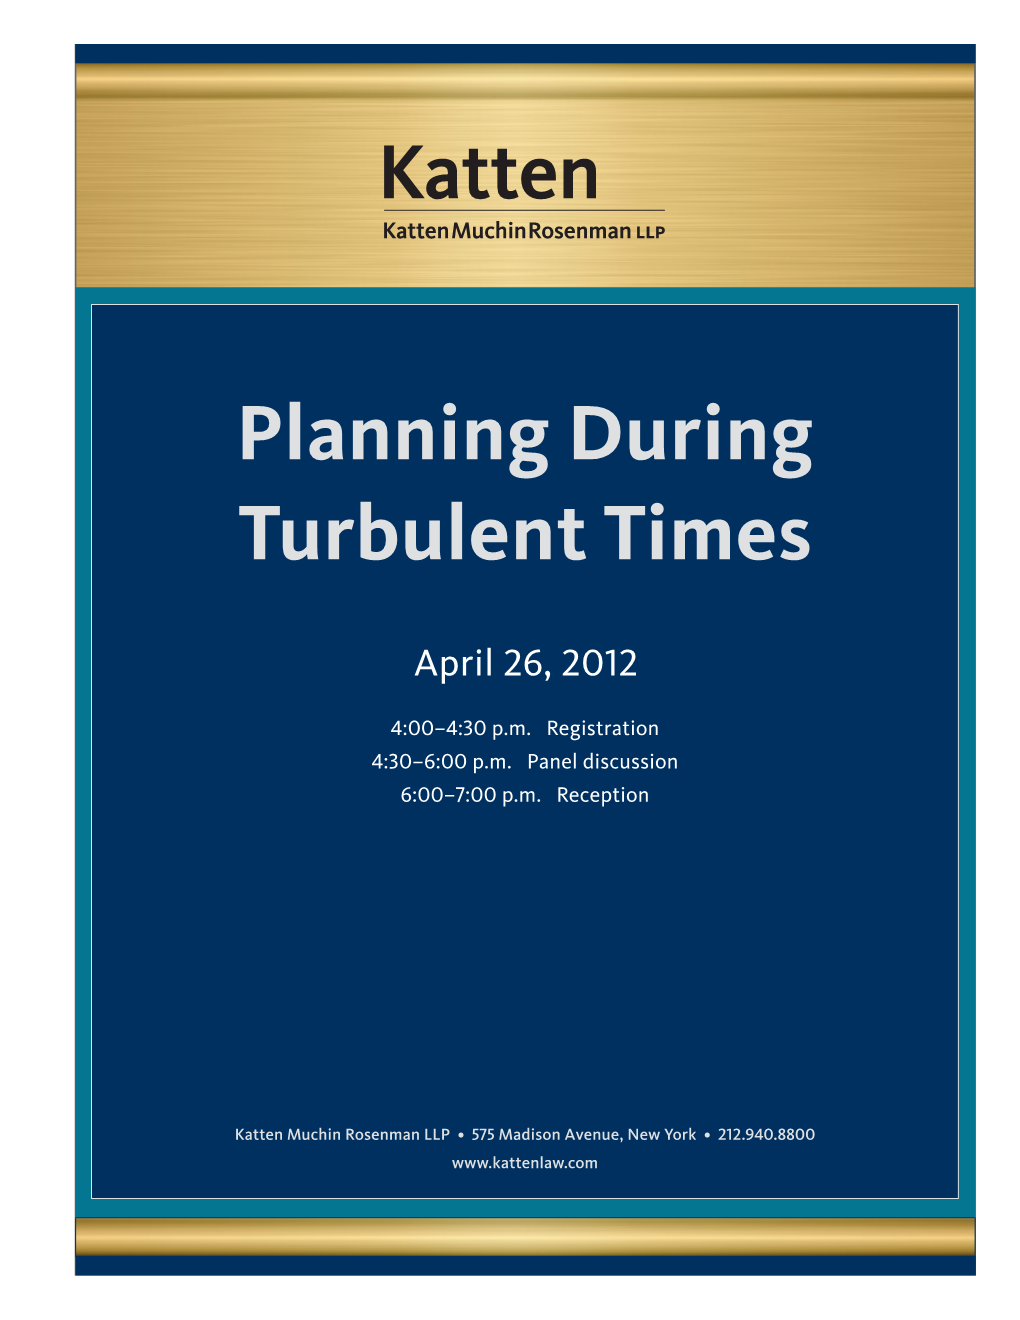 Planning During Turbulent Times